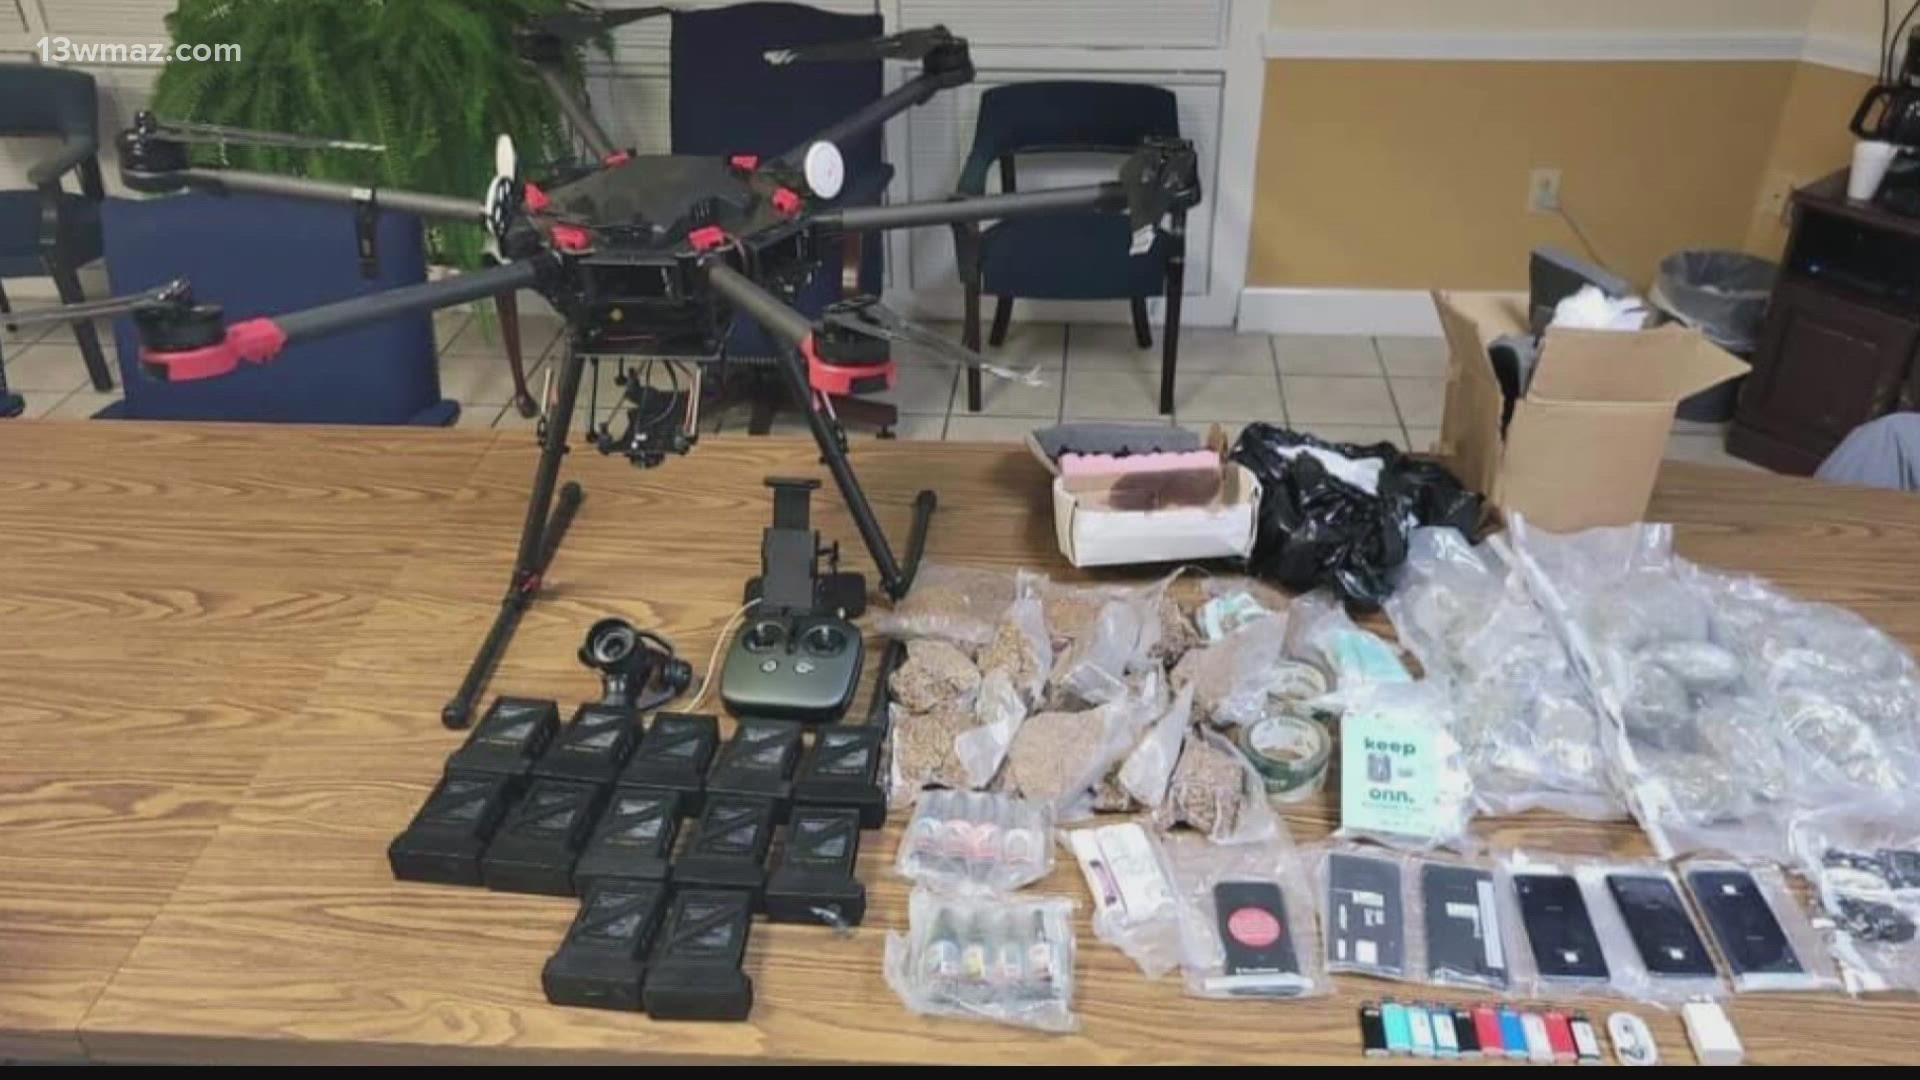 The Washington County Sheriff's Office says the newest form of crime gaining popularity in recent years is sneaking contraband into prisons by drone.